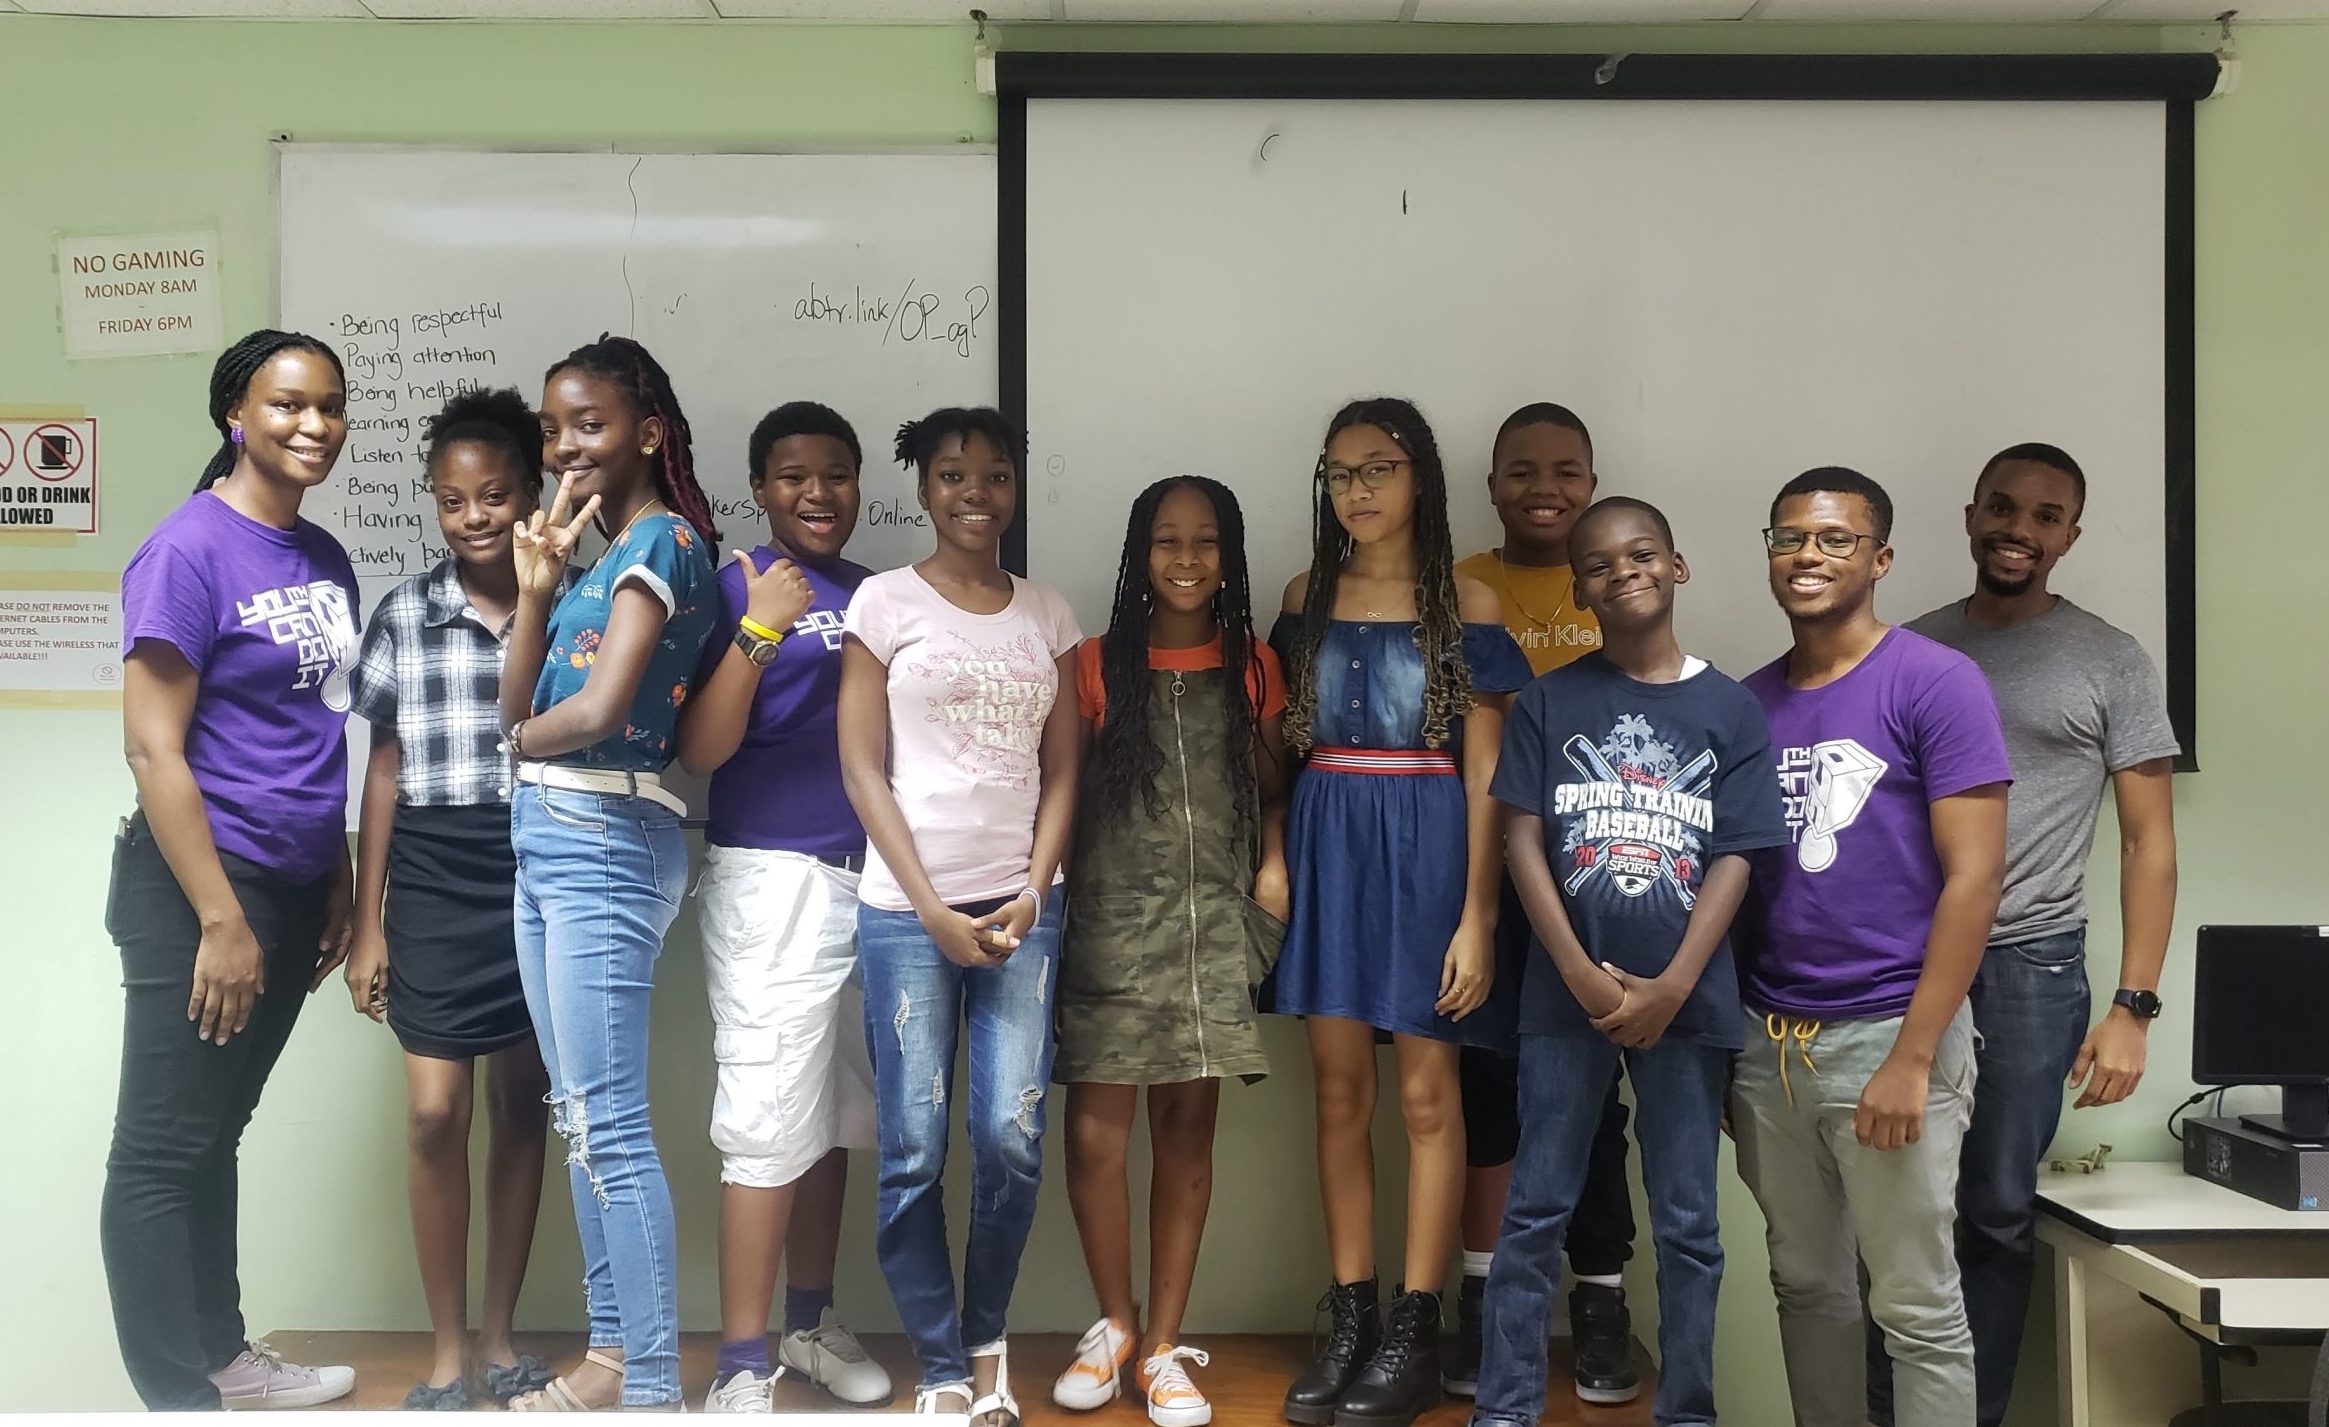 Editoiral: twelve Jamaican young people standing in a row wearing summer clothing, in front of a whiteboard. Smiling to camera.